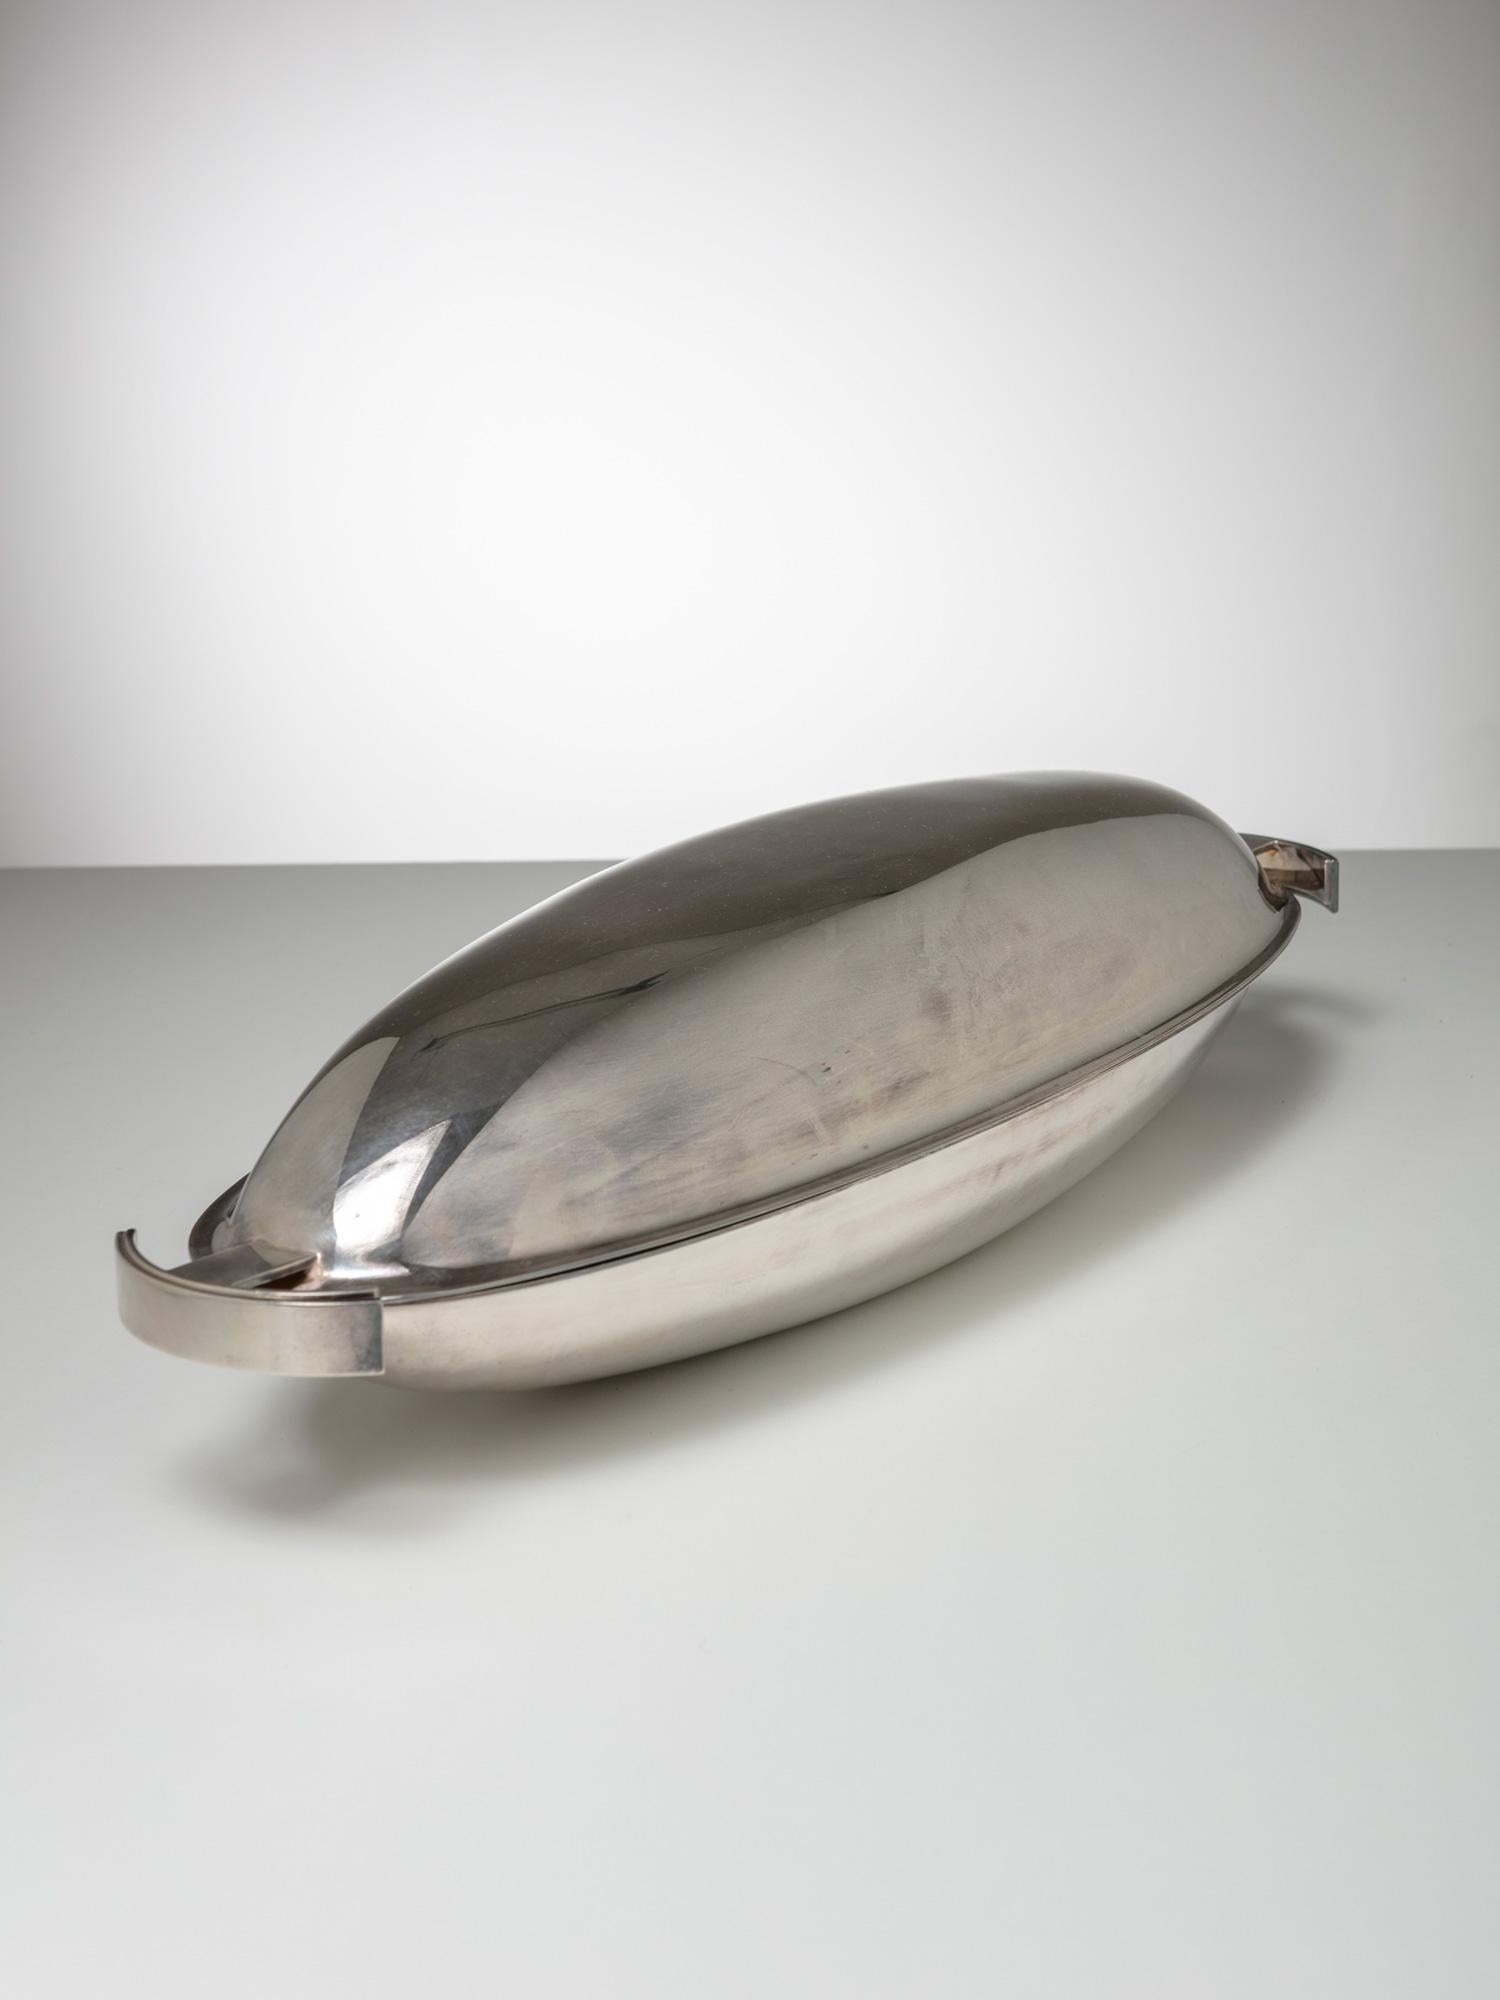 Conch-table fish serving dish by Lino Sabattini for Sabattini Argenteria.
Part of the unlimited research on table ware made by Lino Sabattini along his entire life.